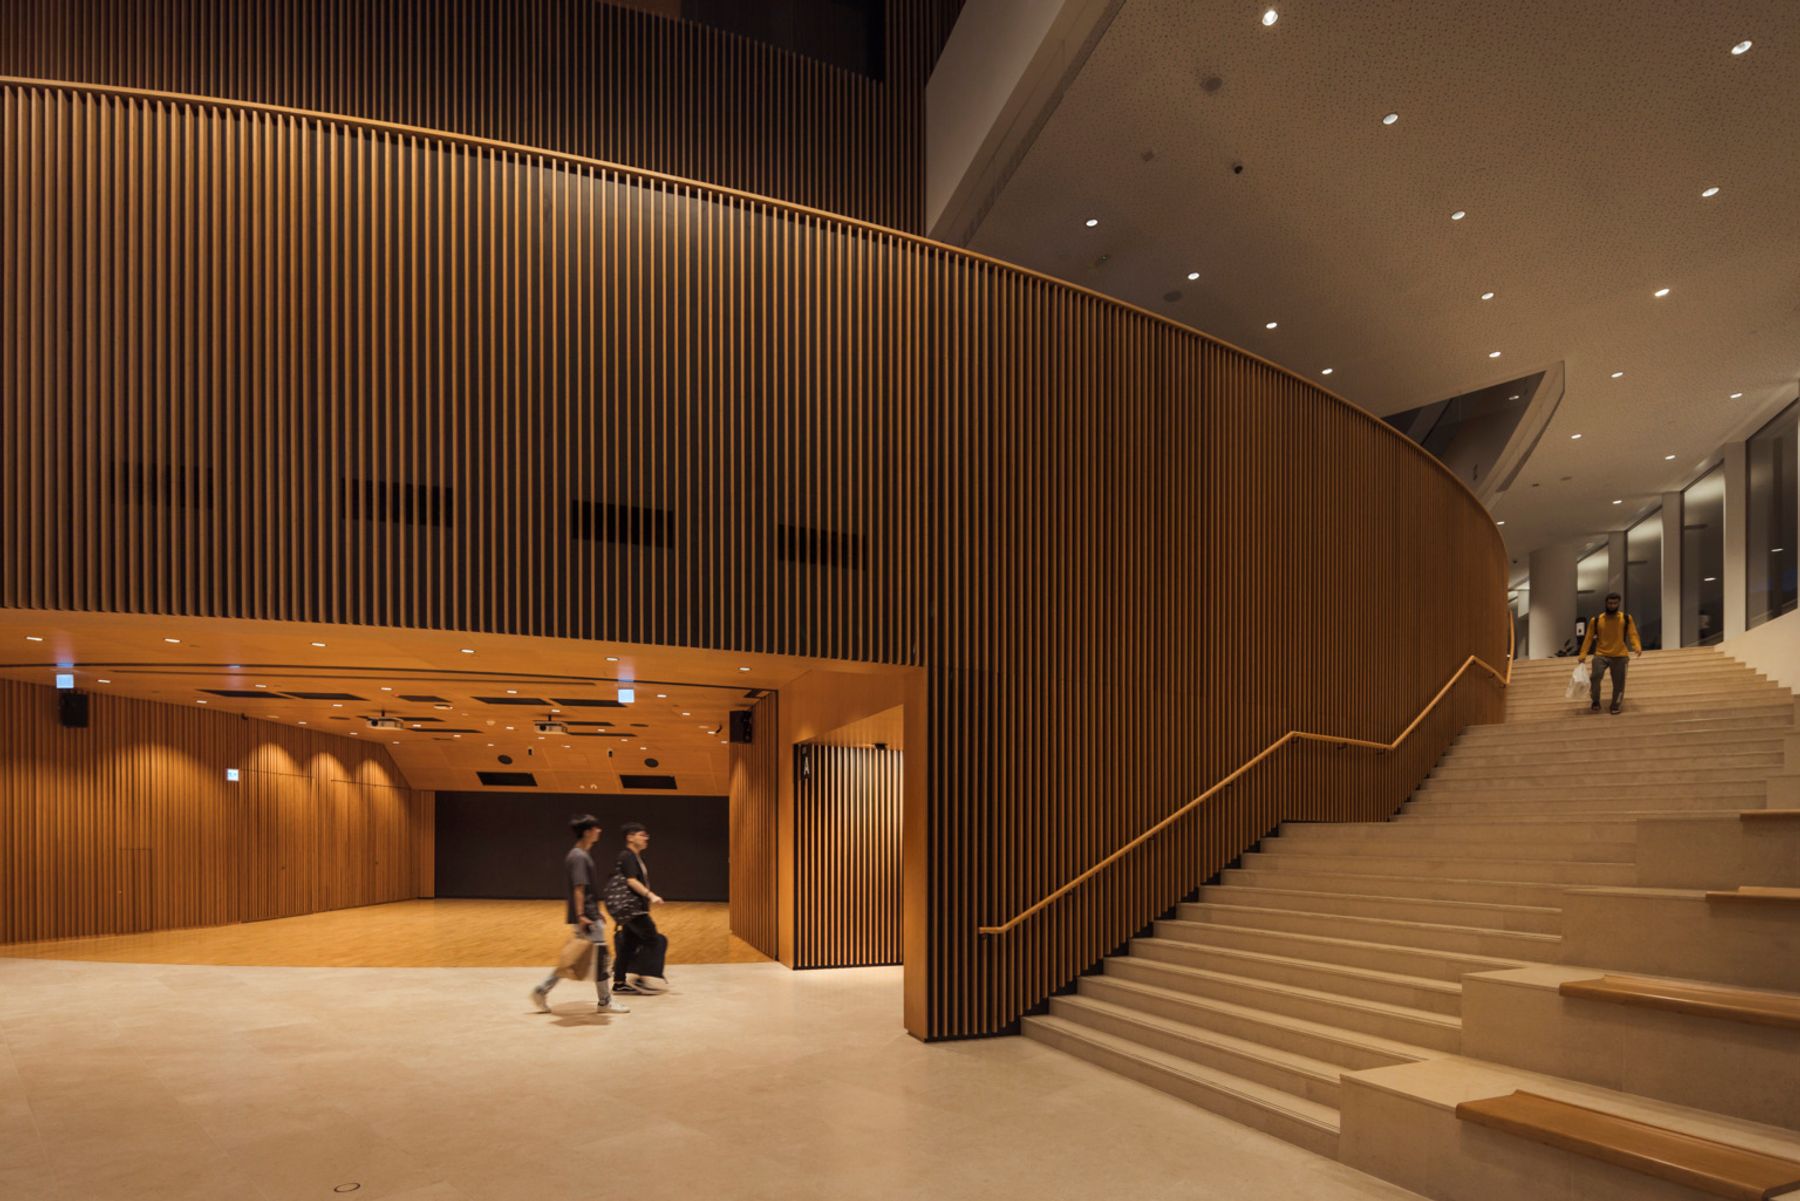 University of Science and Technology, Shaw Auditorium, Hong Kong. Architecture: Henning Larsen / Wong Tung and Partners (Executive). Lighting design: Inhabit group. Photography: Jackie Chan.